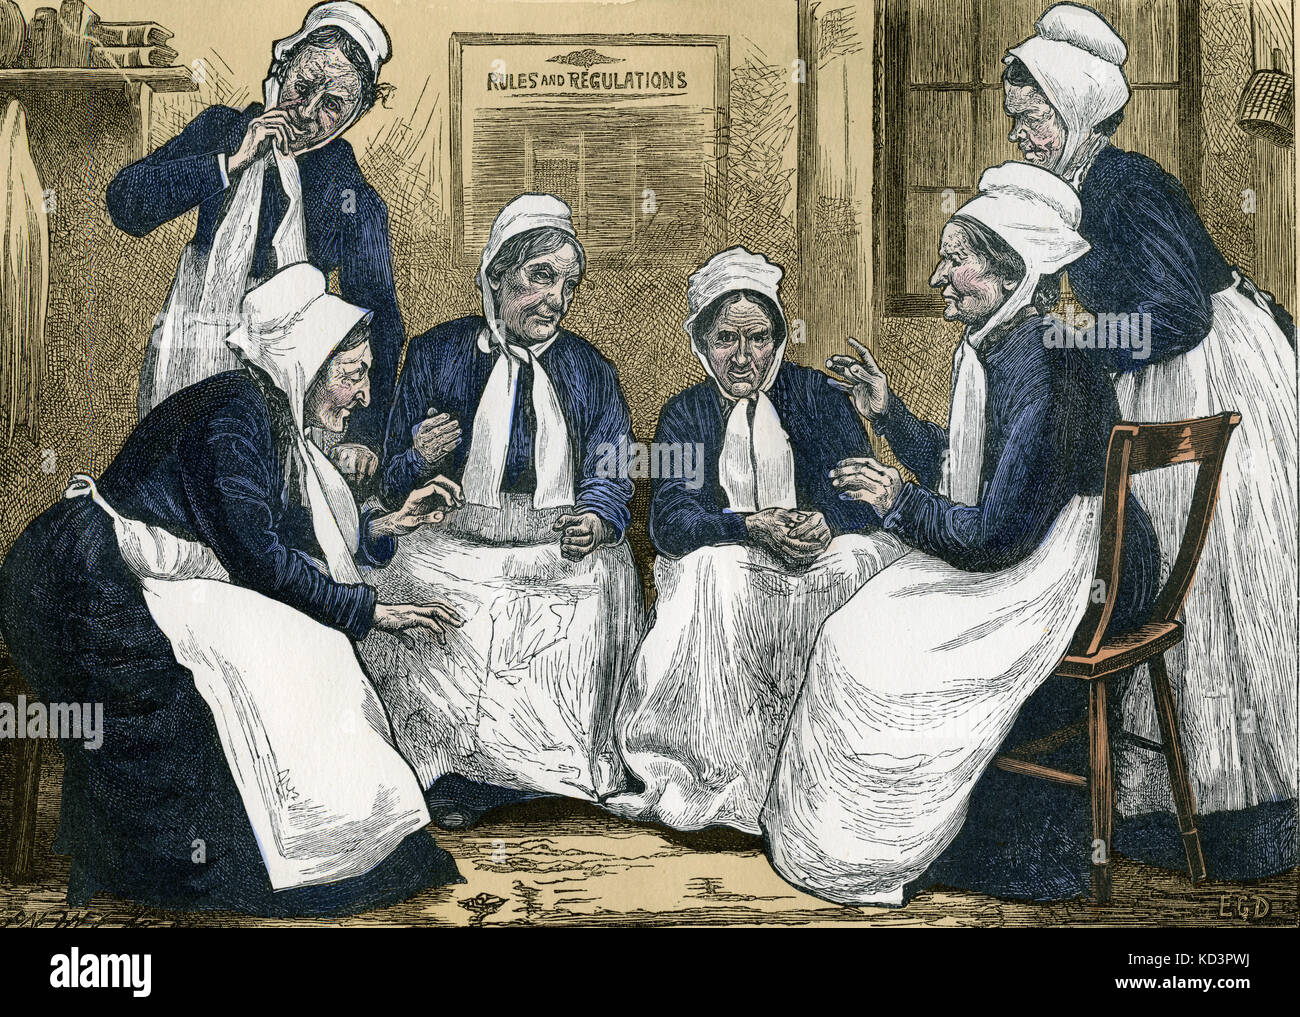 A Walk in the Workhouse- article  by Charles Dickens. Caption reads: . In another room, were several ugly old women crouching, witch-like, round a hearth and chattering and nodding, after the manner of the monkeys.'   English novelist, 7 February 1812 - 9 June 1870. Illustration by Edward G Daziel   .  London . Chapman and Hall. Stock Photo